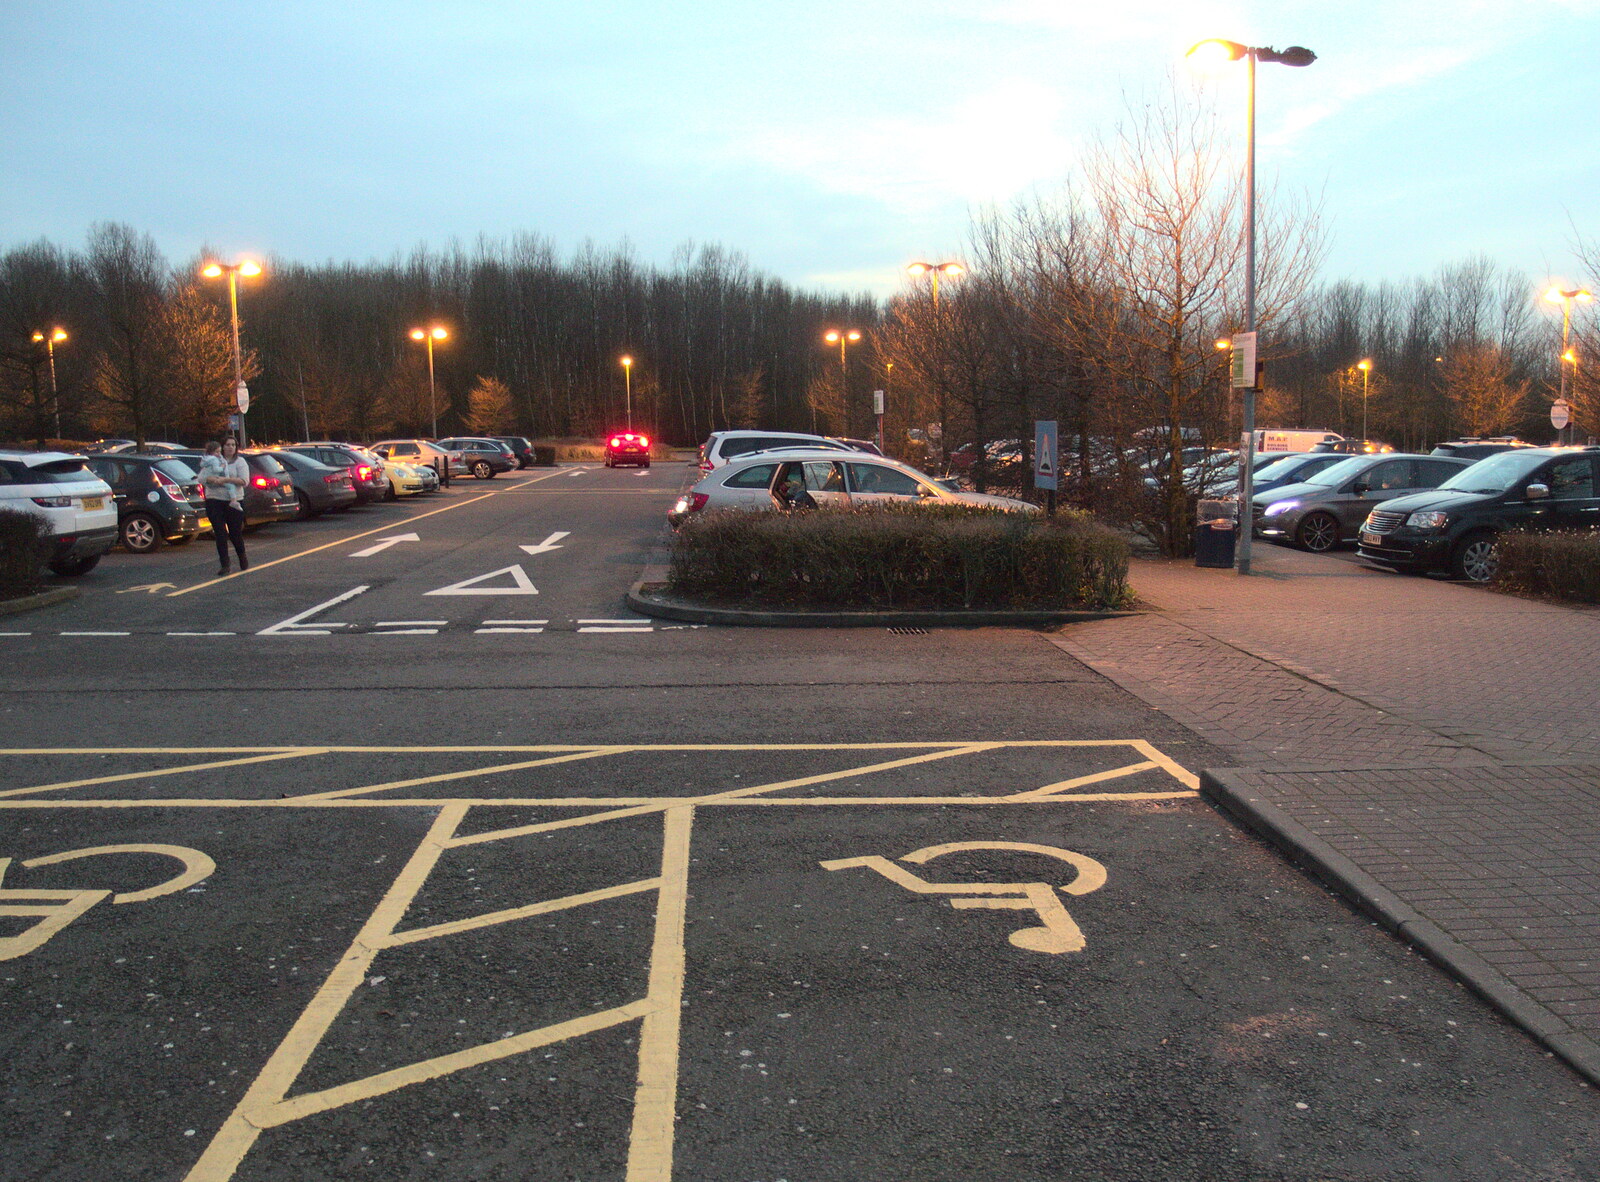 The car park of Corley Services on the M6 from Blackrock North and the Ferry Home, County Louth and the Irish Sea - 27th December 2015